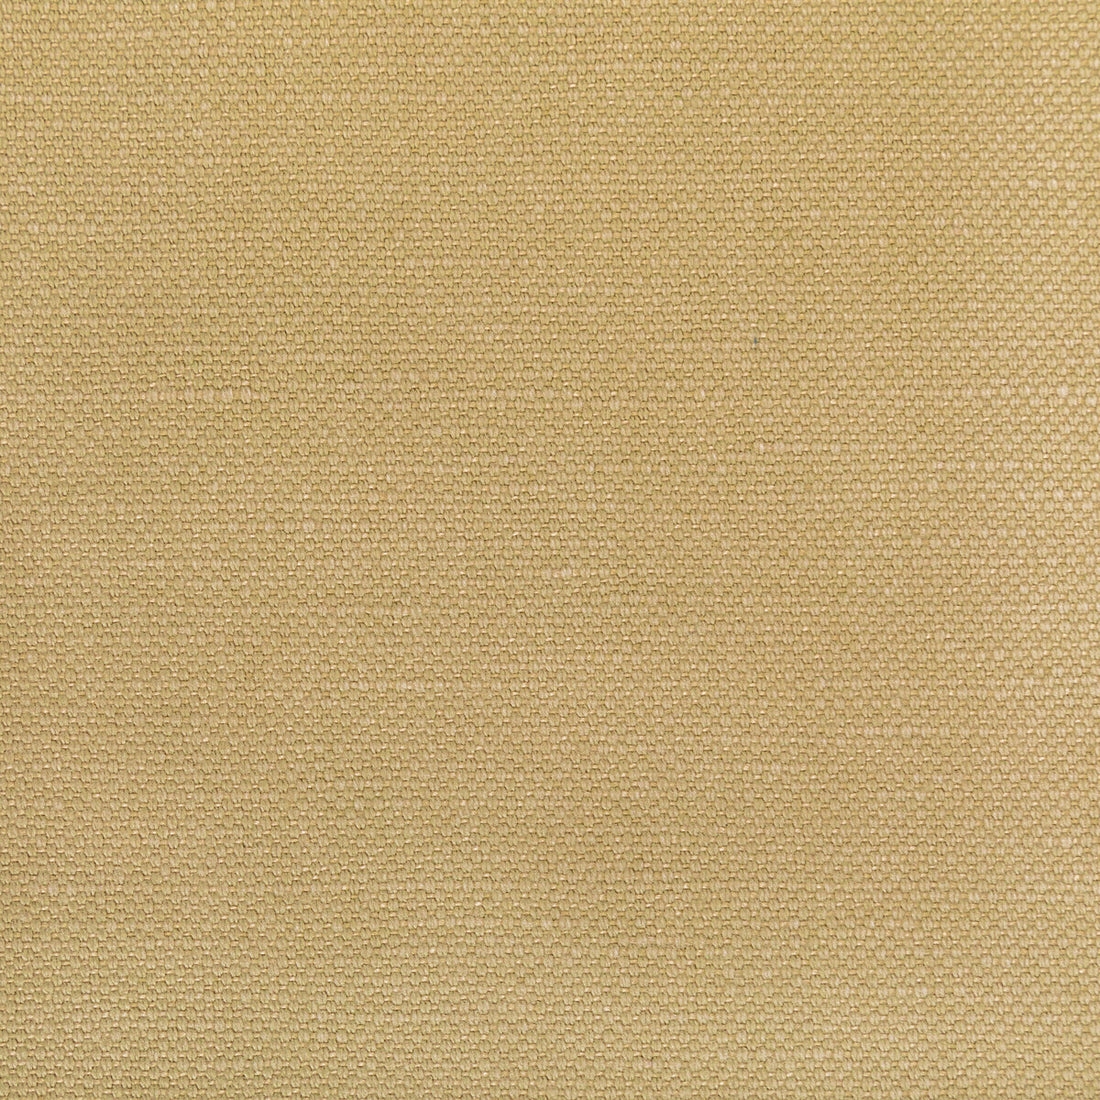 Carson fabric in pecan color - pattern 36282.1416.0 - by Kravet Basics